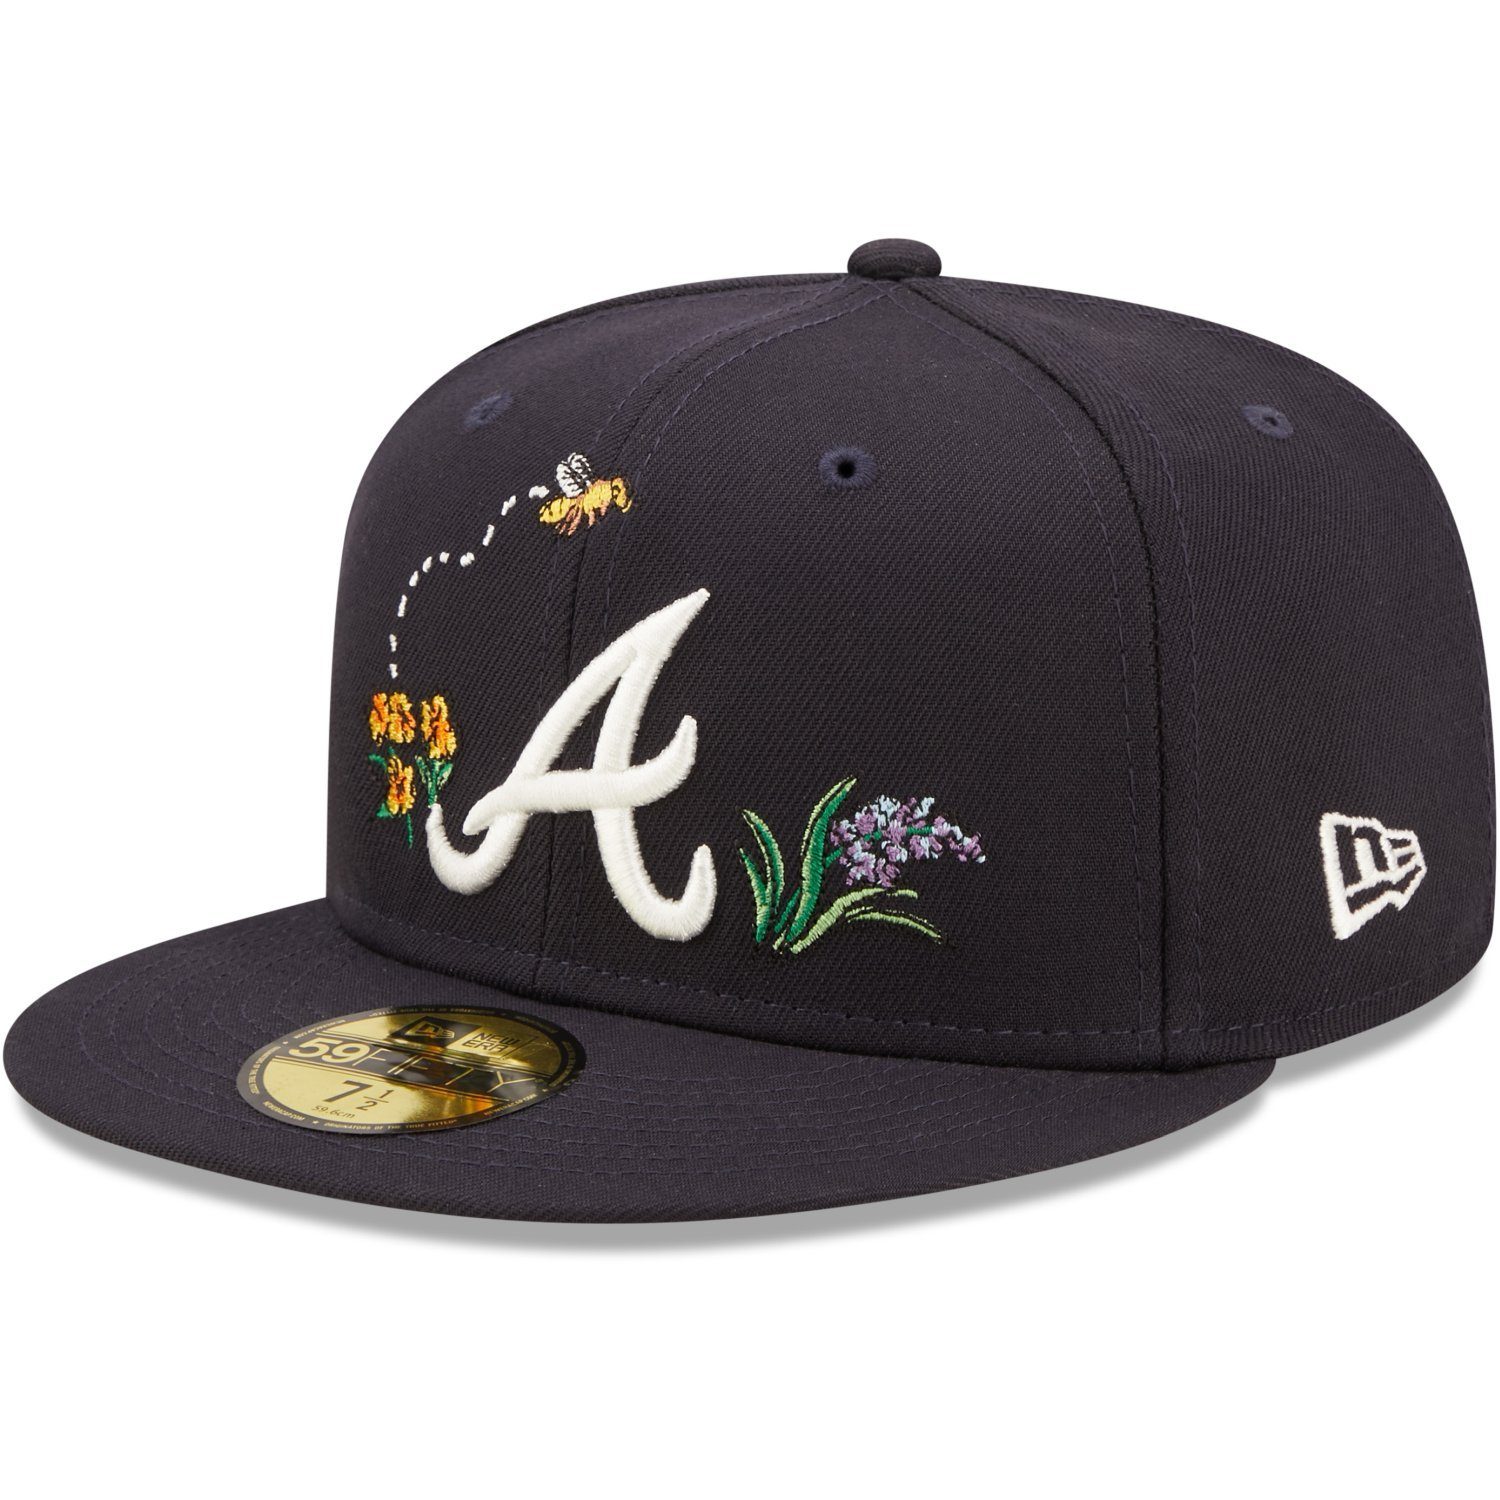 New Era Fitted Cap 59Fifty WATER FLORAL Atlanta Braves